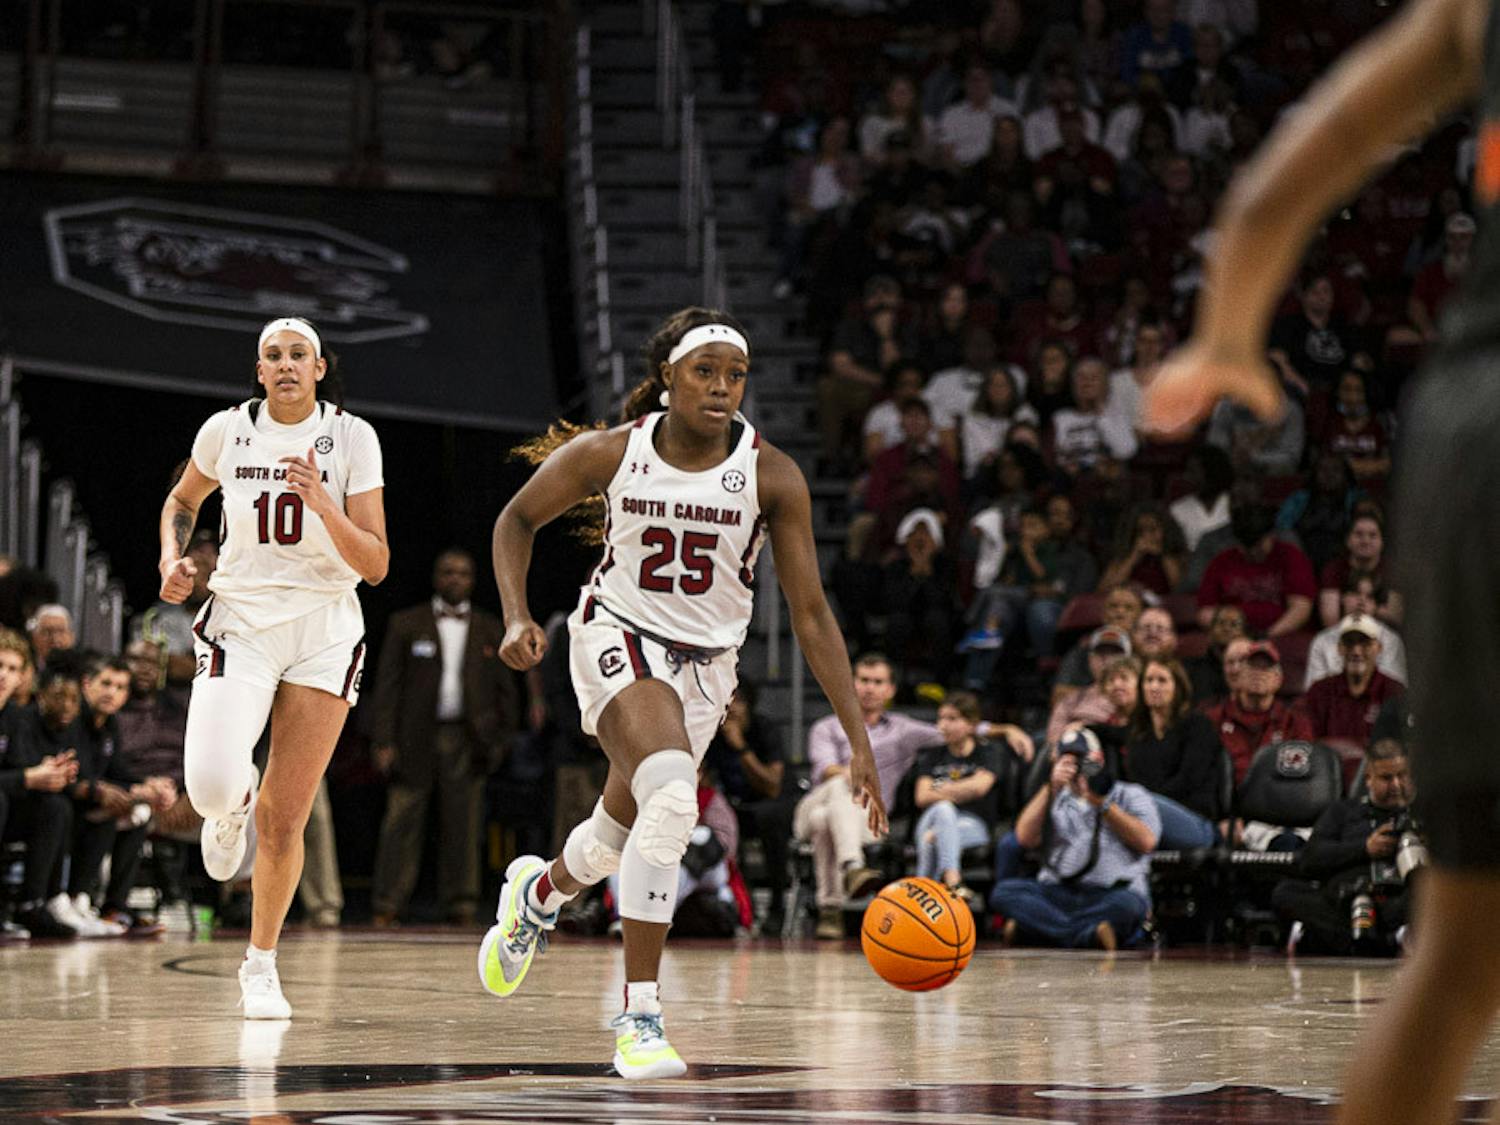 Redshirt freshman guard Raven Johnson runs the ball down the court during the matchup between South Carolina and Florida at Colonial Life Arena on Feb. 16, 2023. The Gamecocks beat the Gators 87-56.&nbsp;